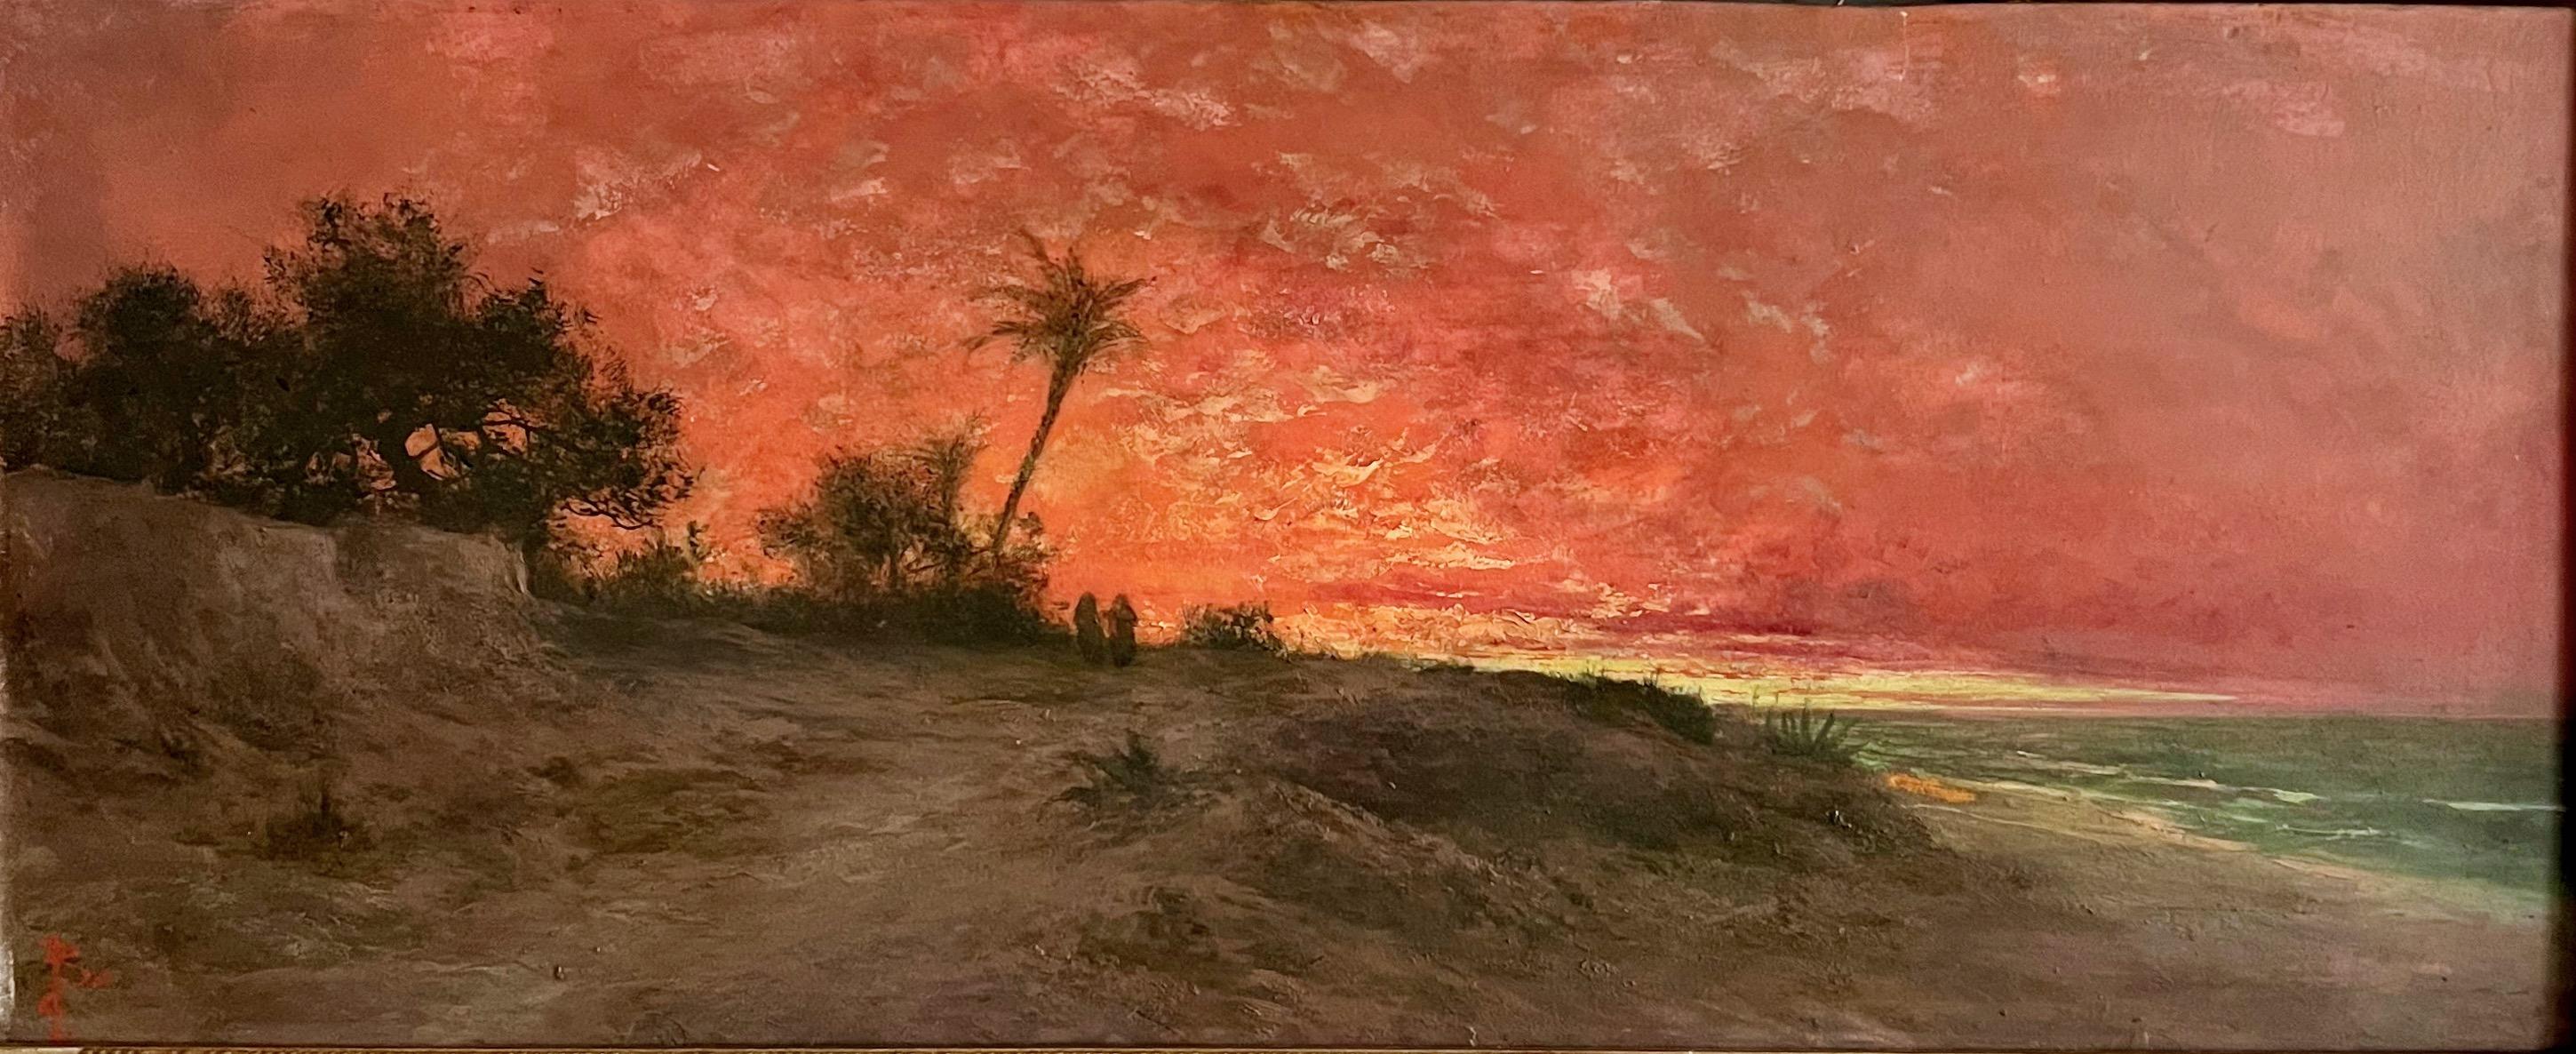 Unknown Landscape Painting - Sunset in an Oriental Landscape By The Sea. 